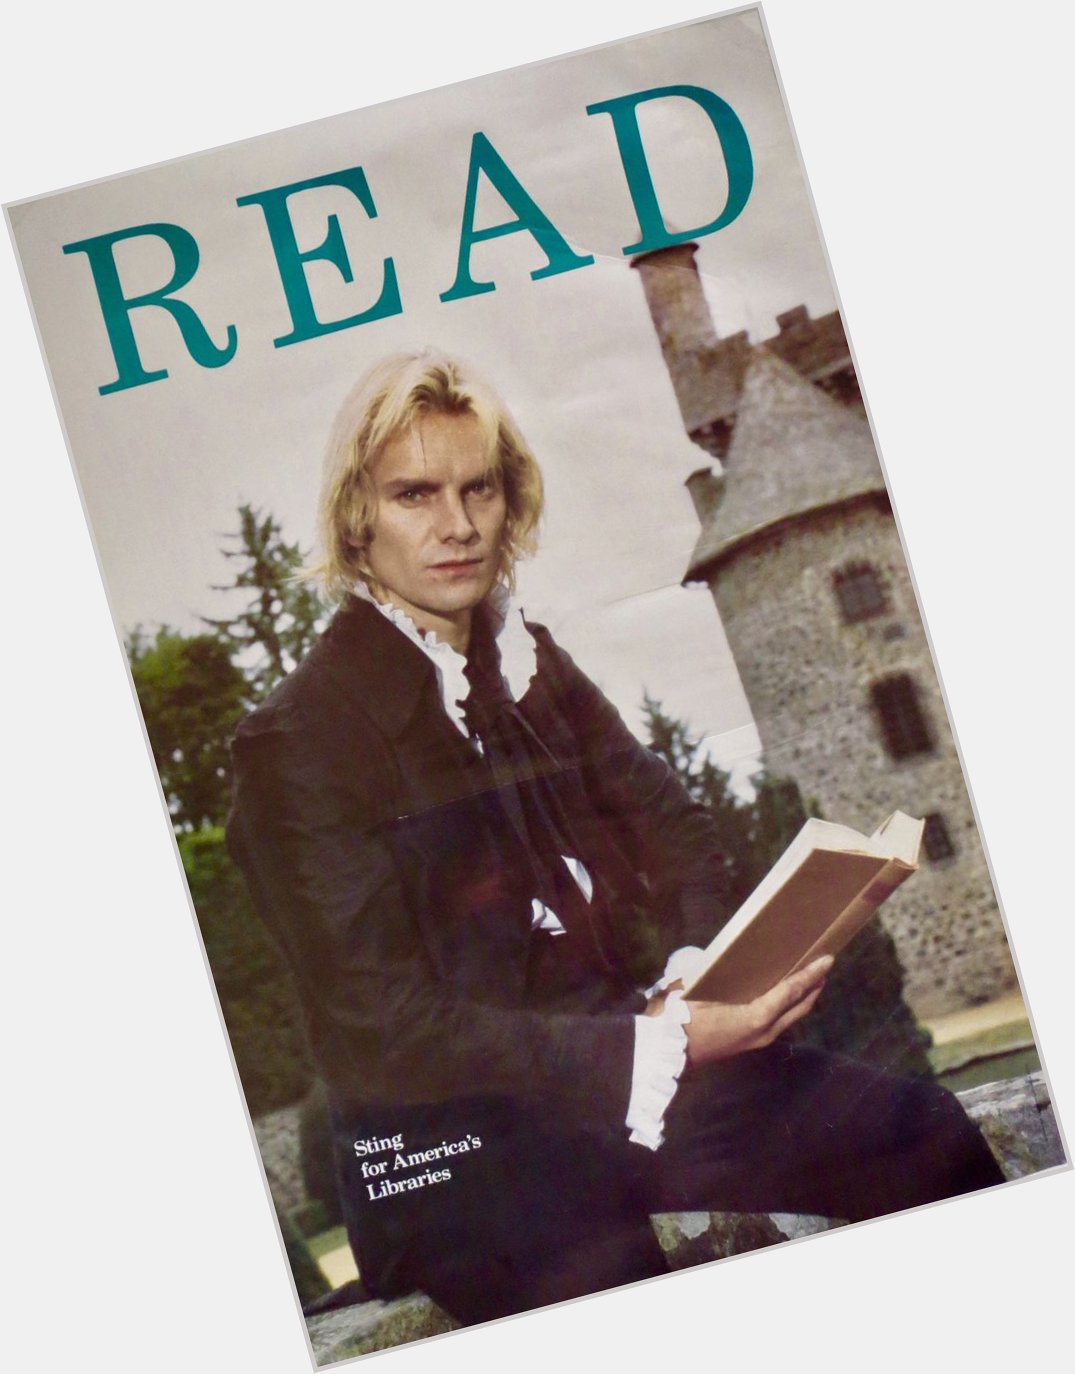 Happy birthday Sting! You ll always be the greatest Vampire Lestat never-was in my heart         